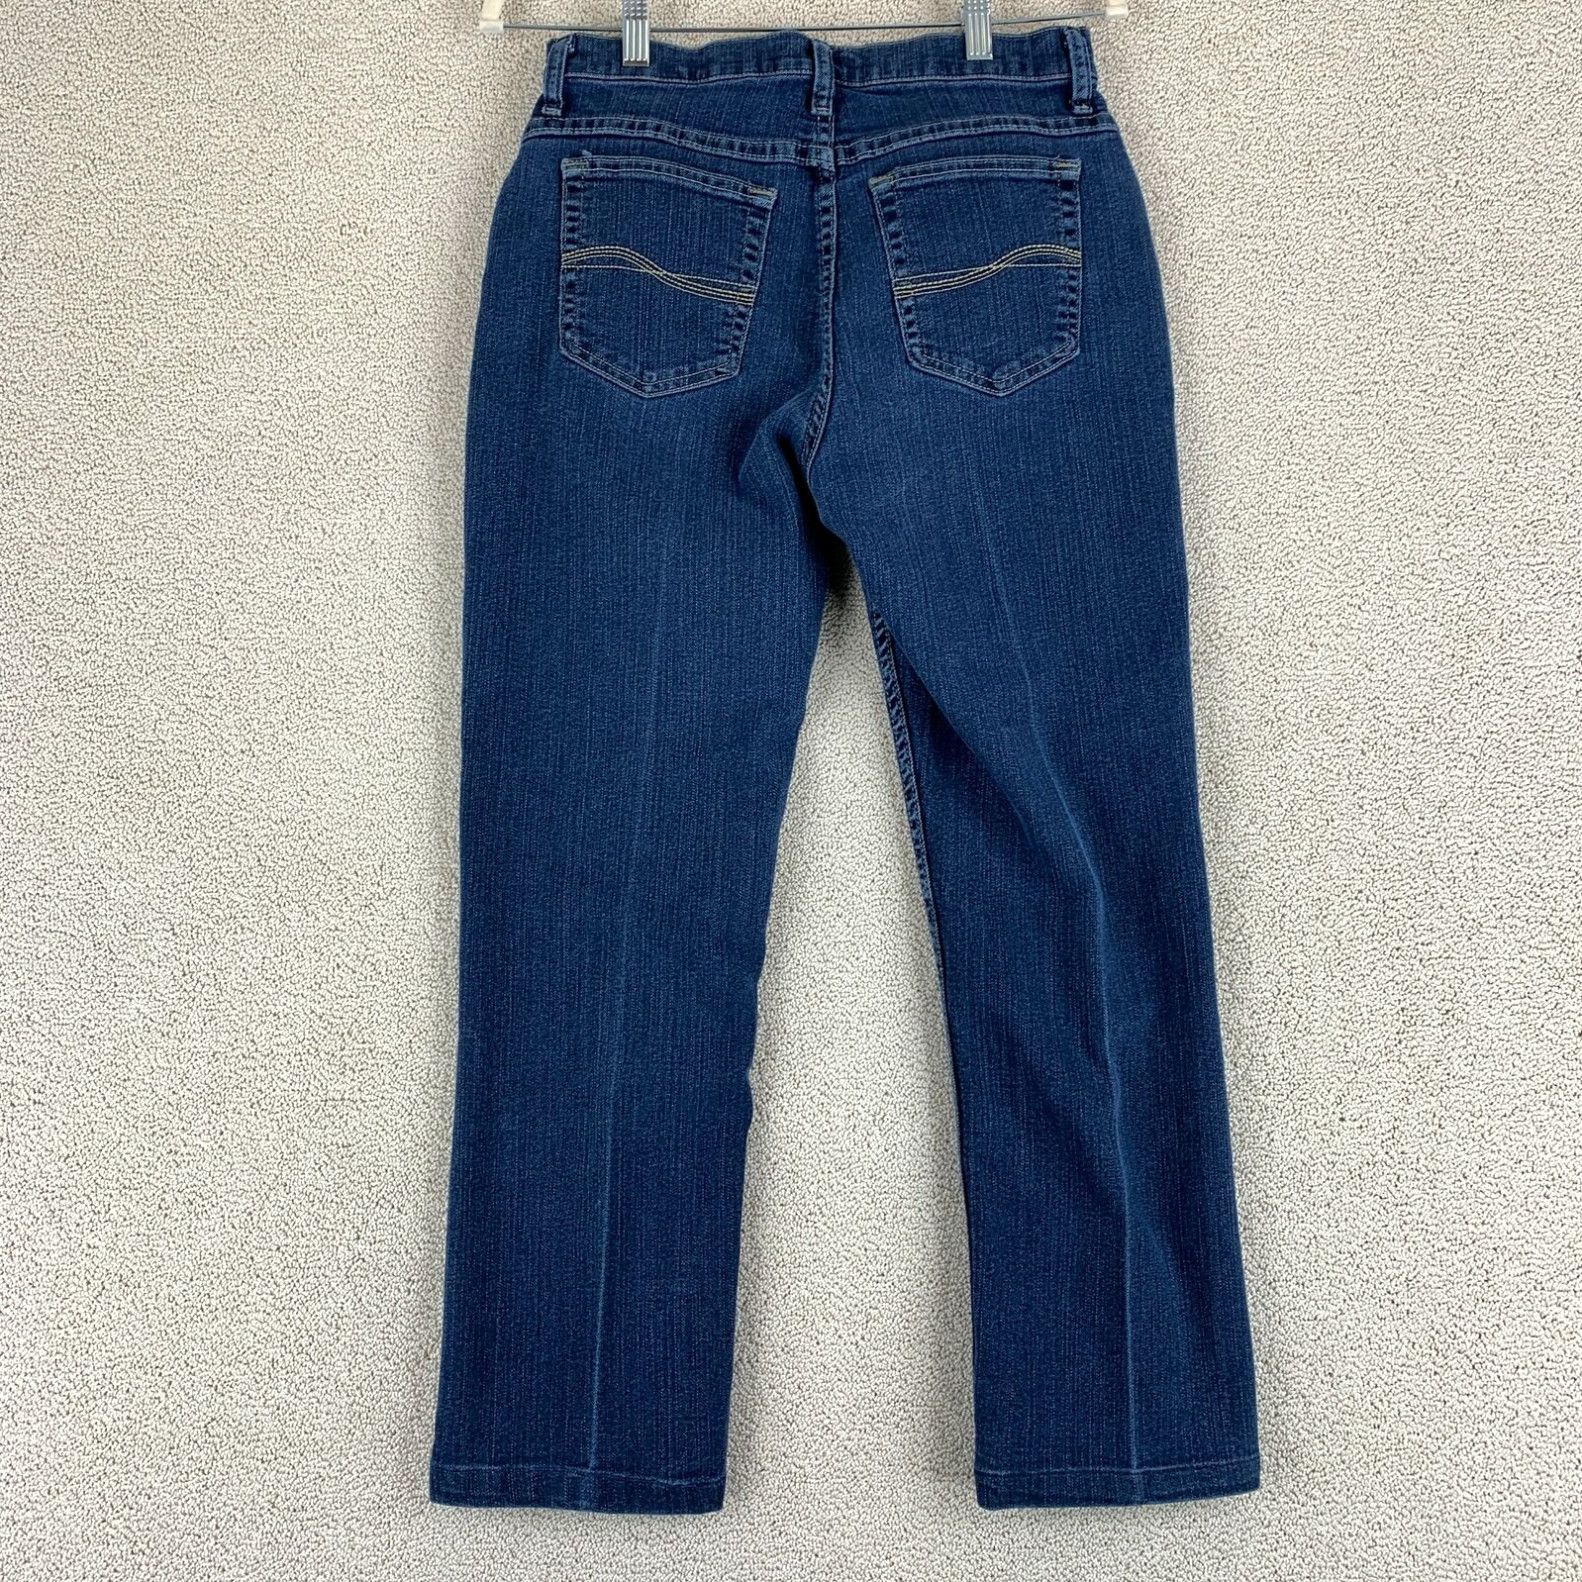 Vintage Riders by Lee Classic Straight Jeans Women's 10 Petite Blue 5-Pocket Mid Rise Size ONE SIZE - 3 Thumbnail